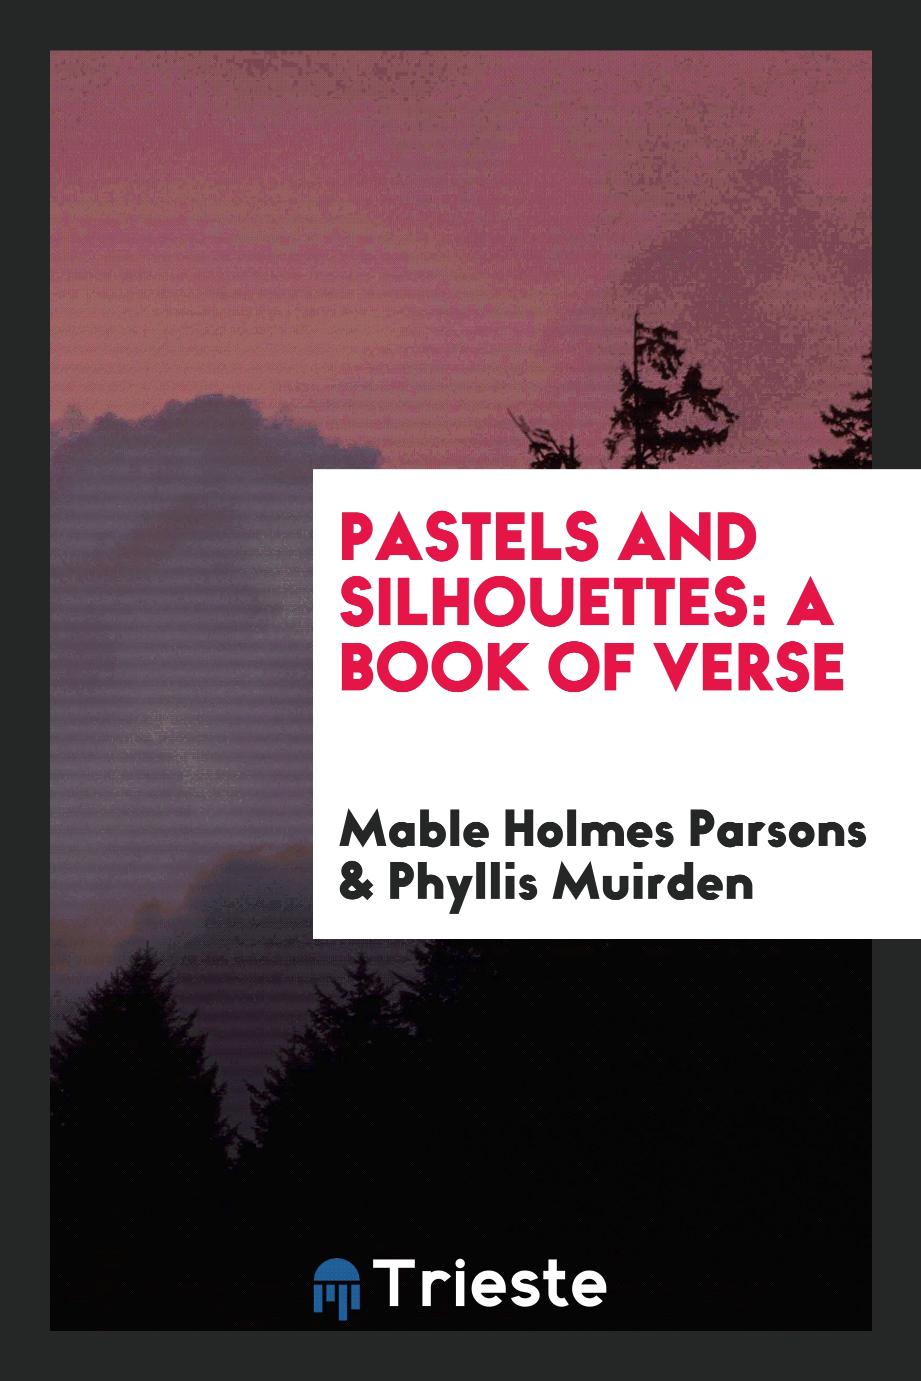 Pastels and Silhouettes: A Book of Verse